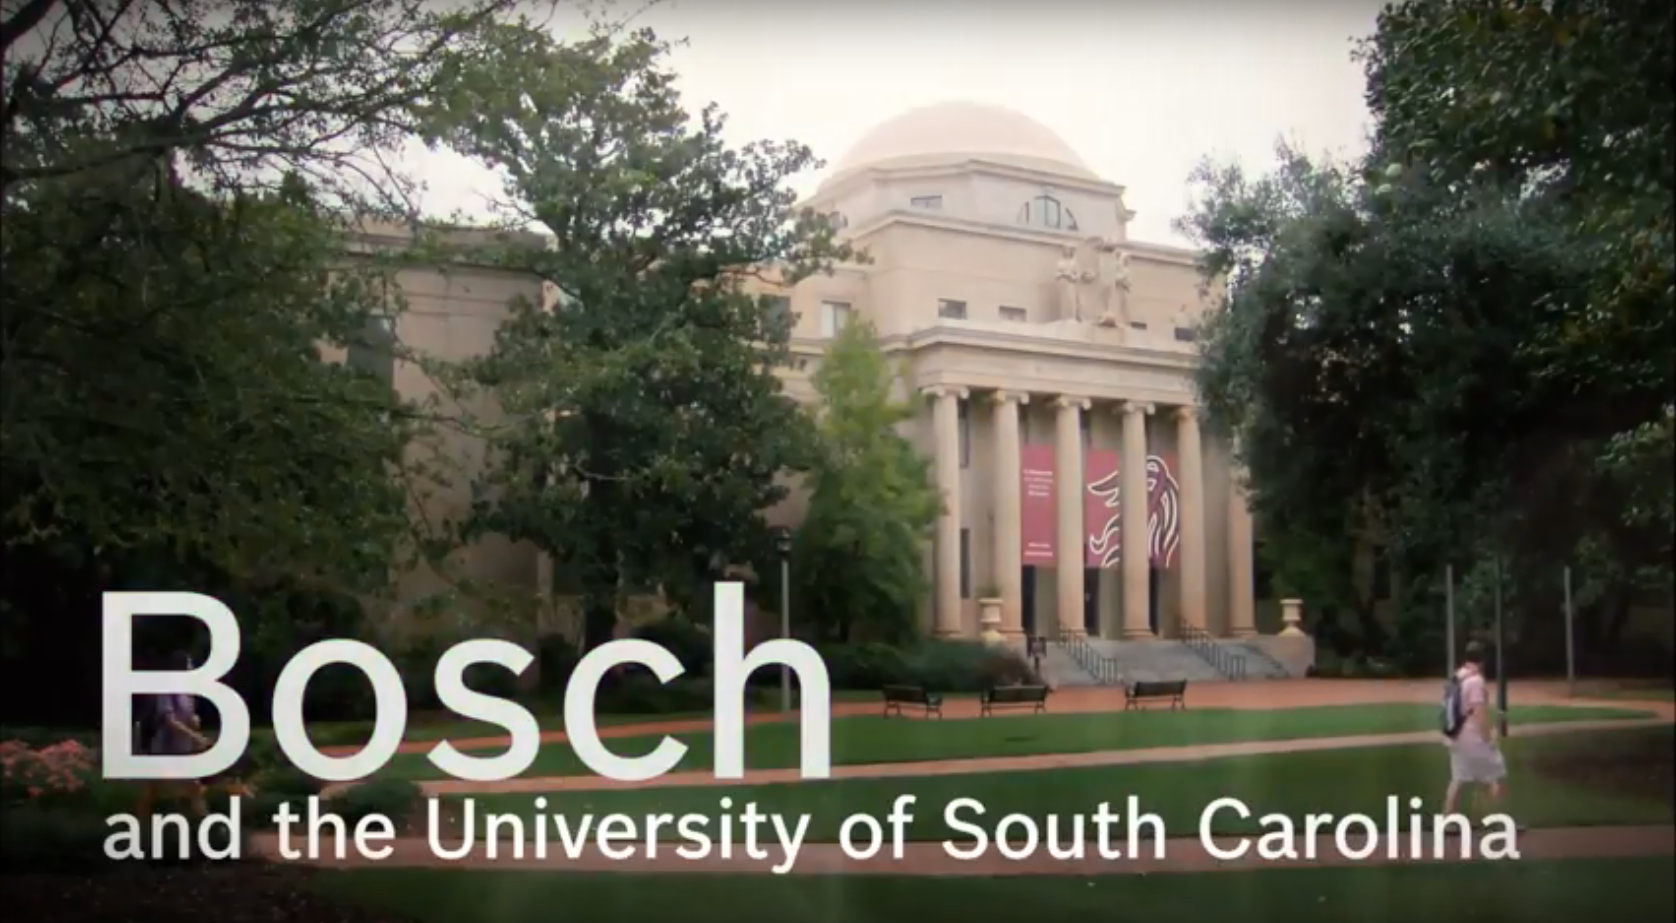 USC Moore School of Business Spring 2020 EXPO | Bosch in the USA